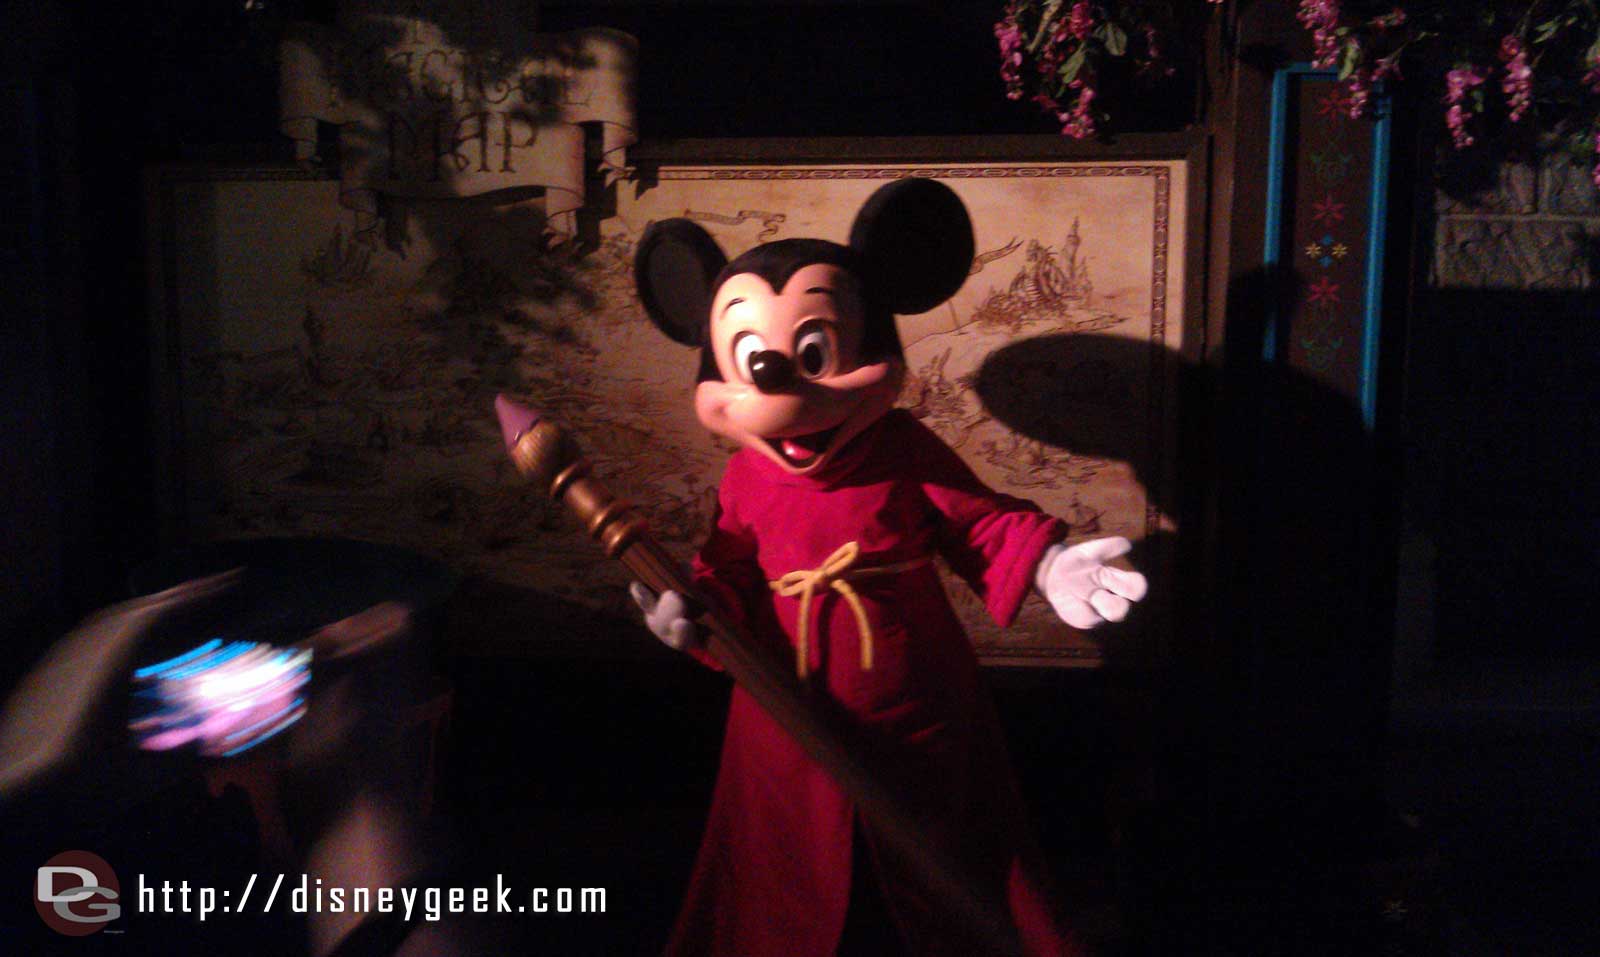 Mickey celebrating after the Premiere of his new show JustGotHappier